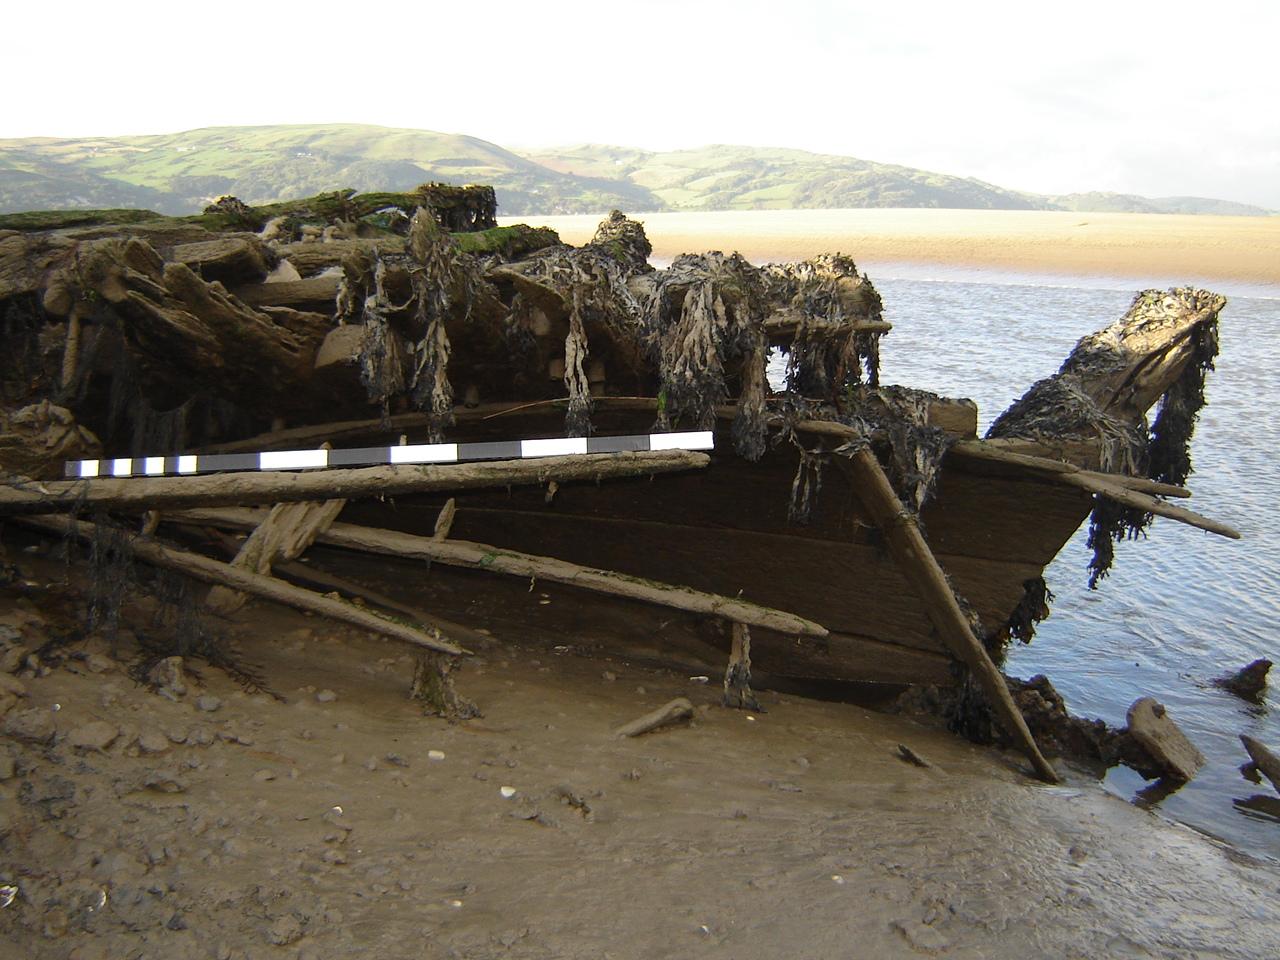 Remains of a Slate Schooner (Hulk 3) at Ynyslas Beach on the south bank of the River Dovey